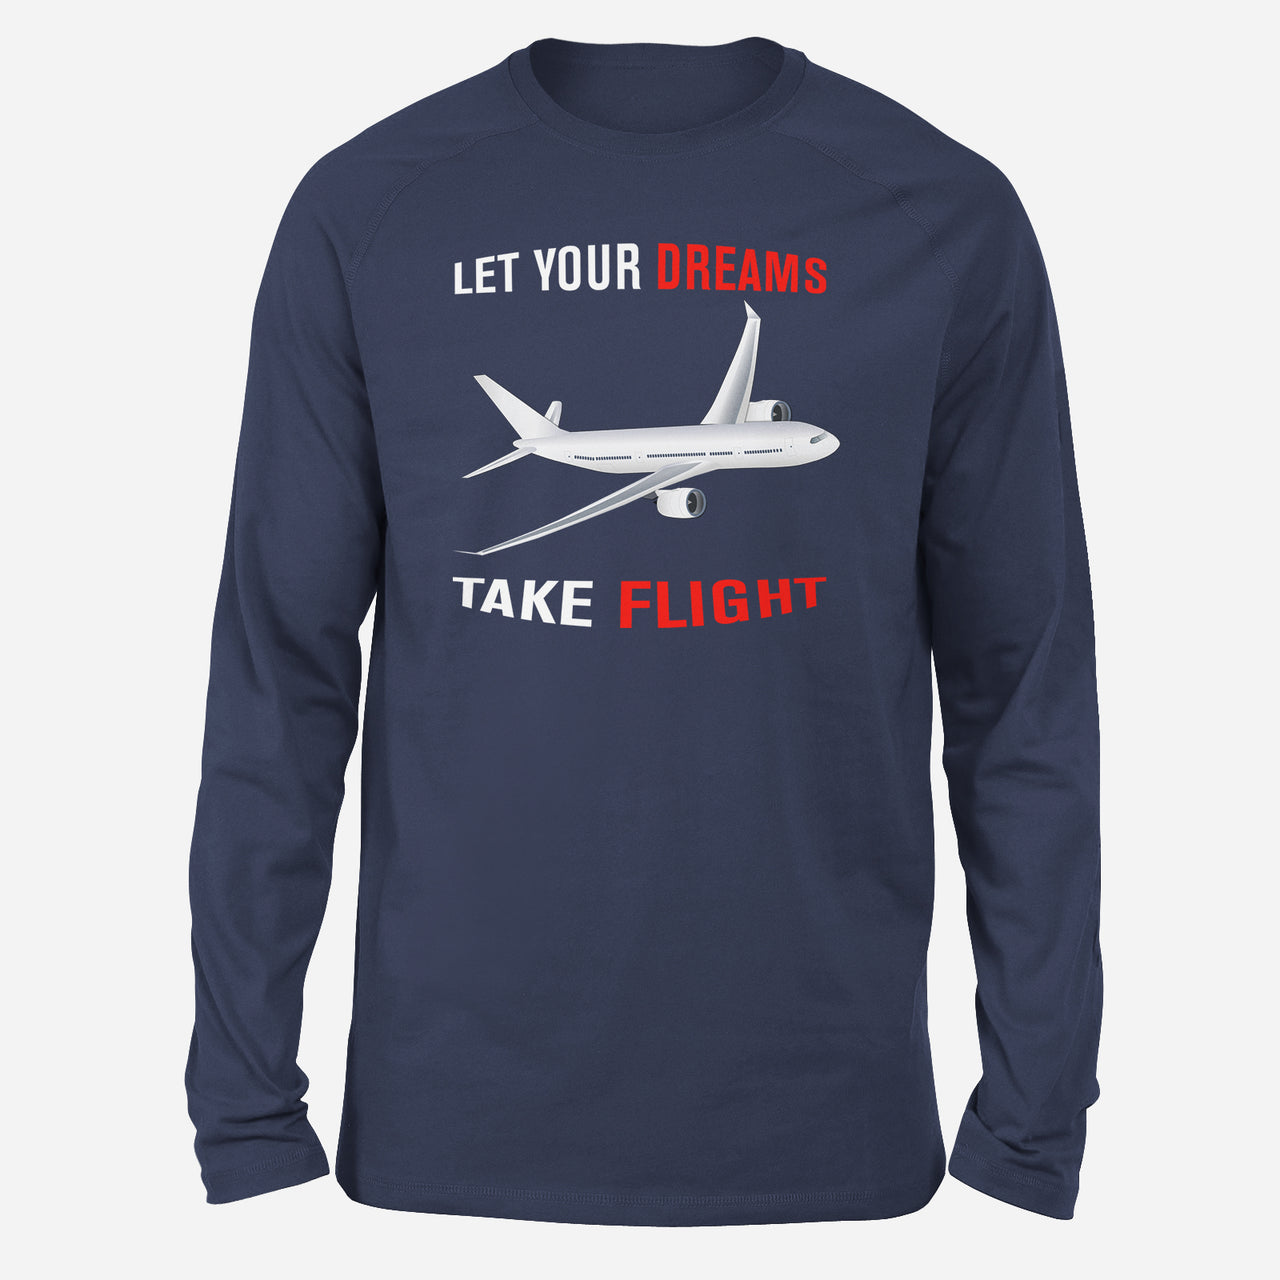 Let Your Dreams Take Flight Designed Long-Sleeve T-Shirts